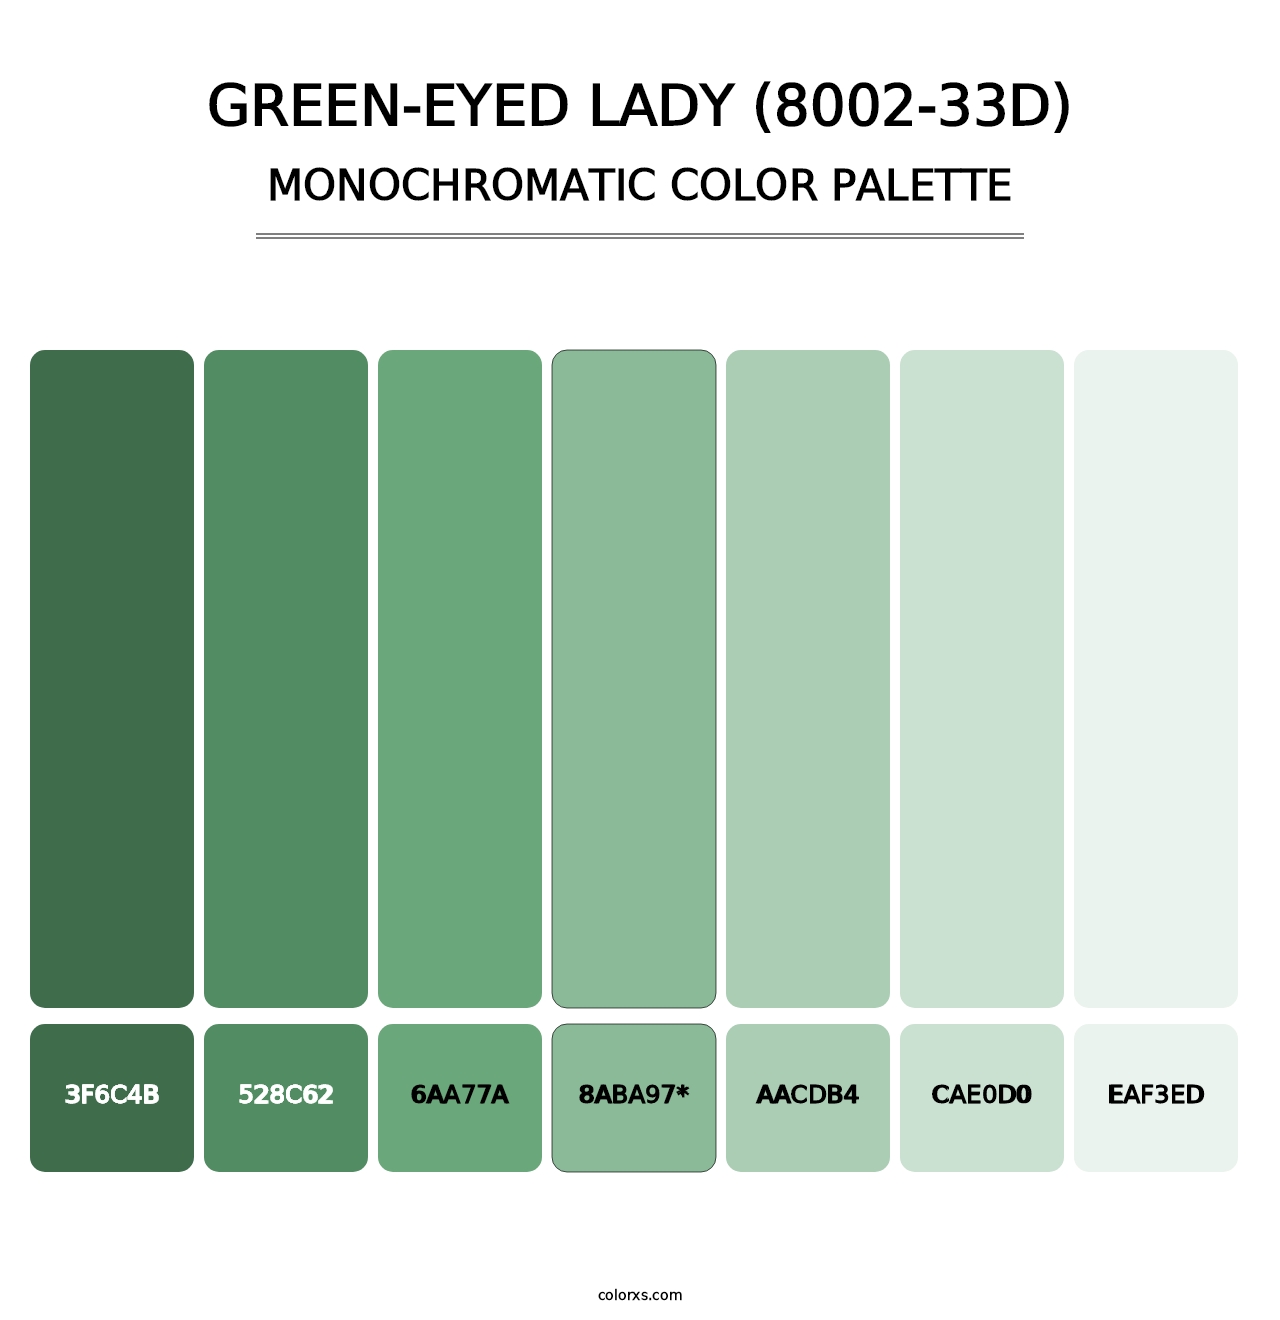 Green-Eyed Lady (8002-33D) - Monochromatic Color Palette